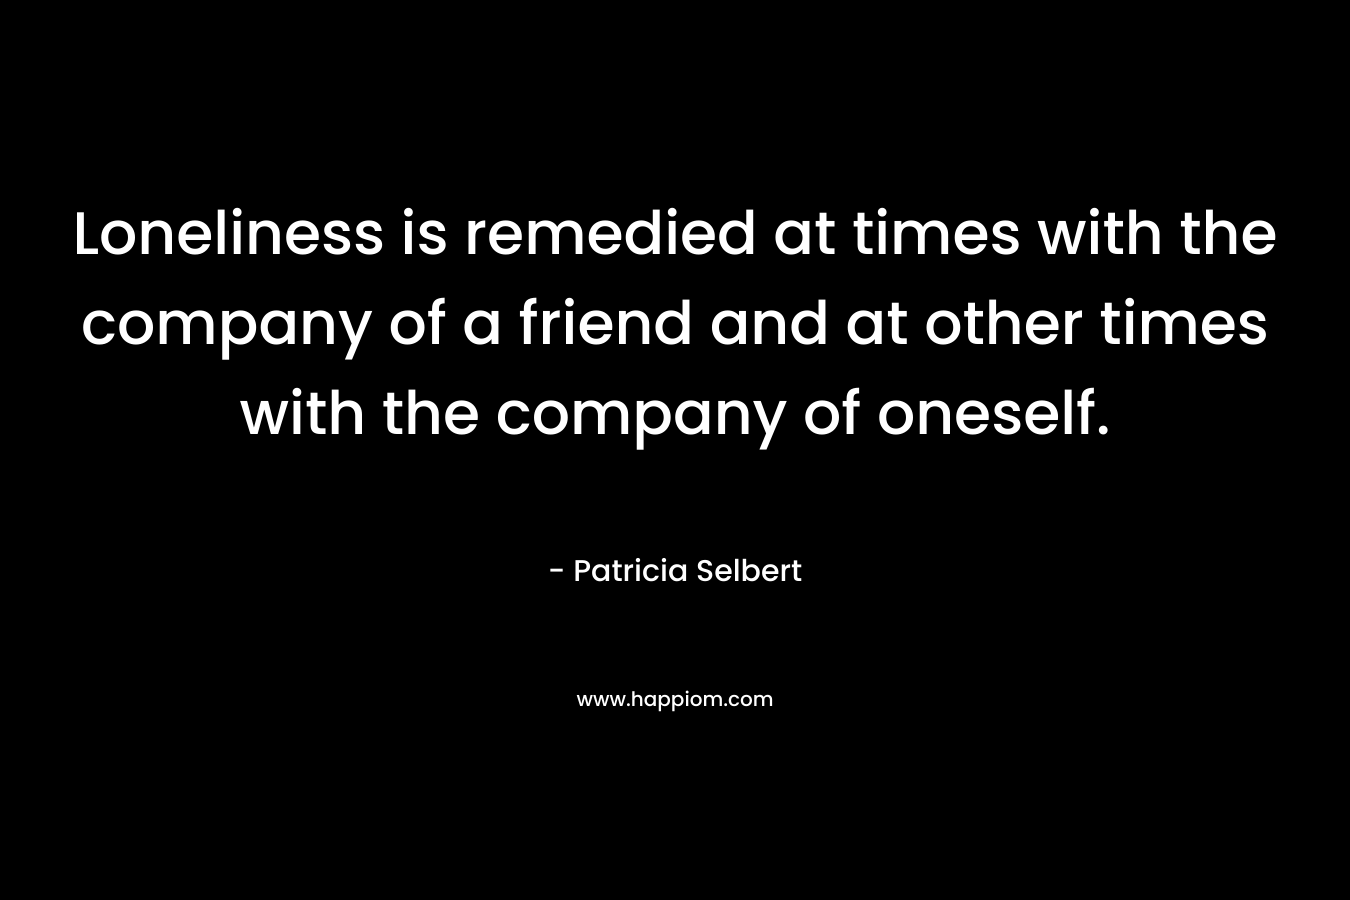 Loneliness is remedied at times with the company of a friend and at other times with the company of oneself.